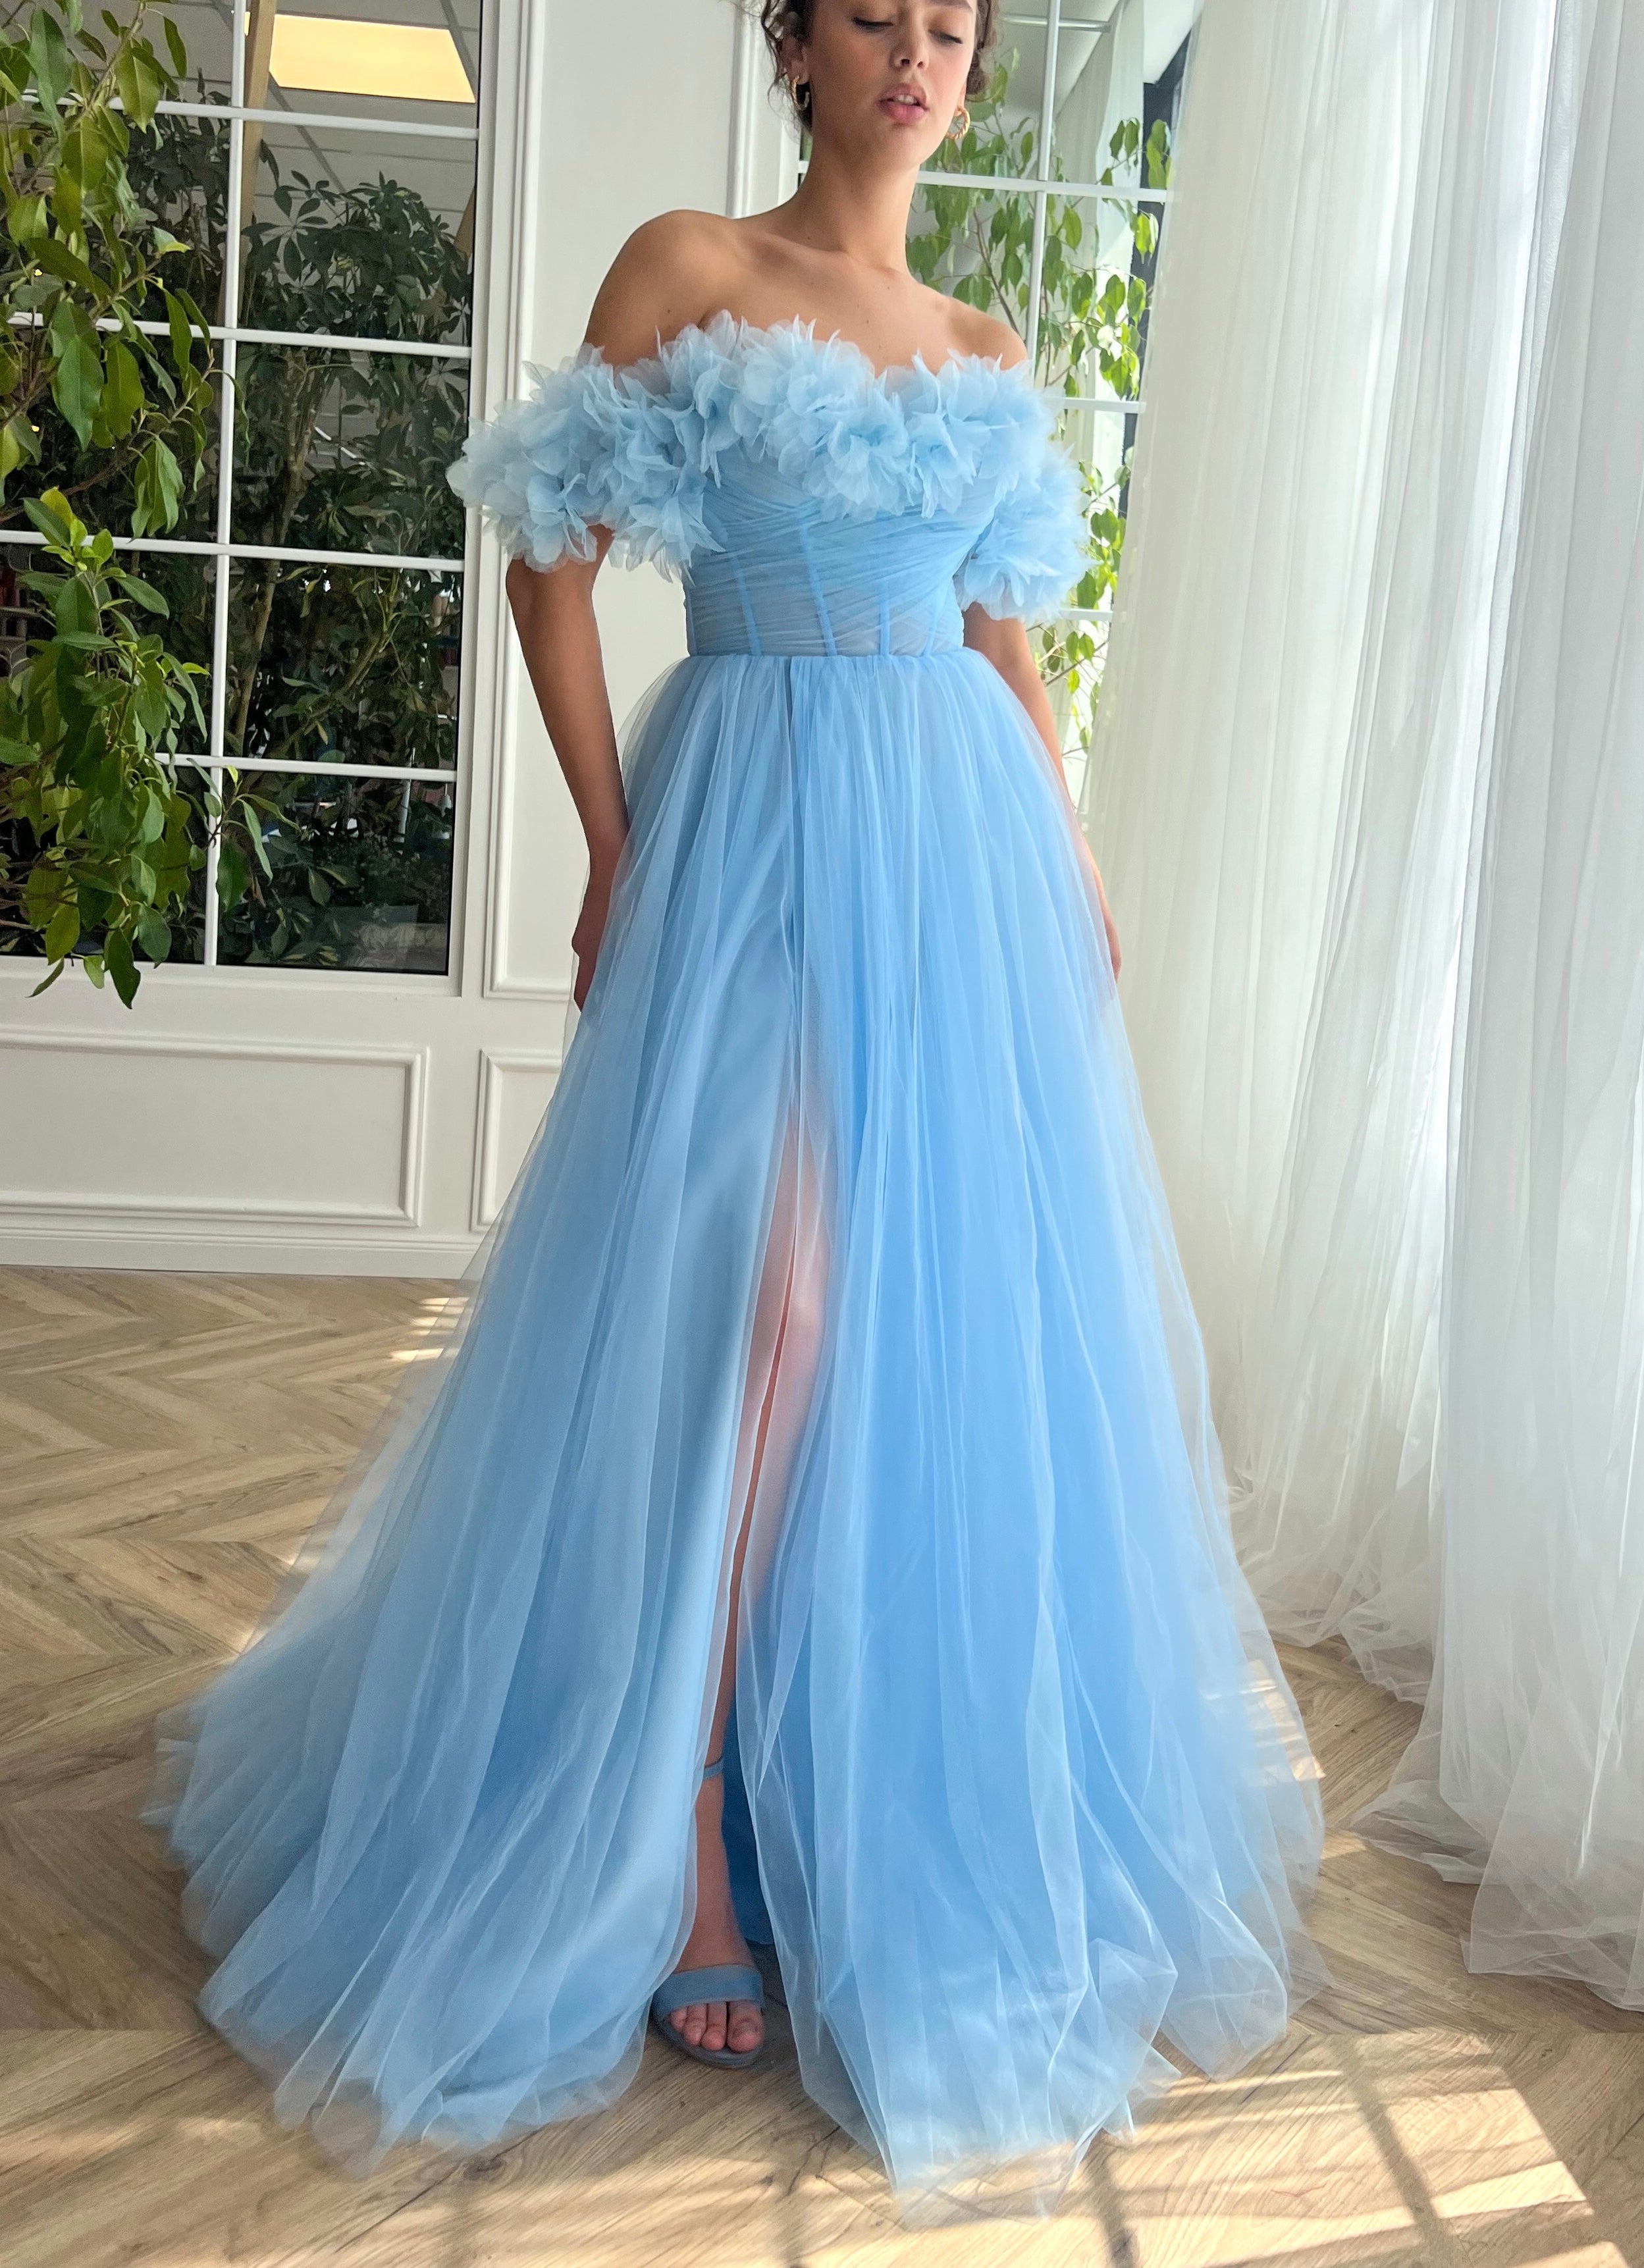 Blue A-Line dress with off the shoulder sleeves and embroidery